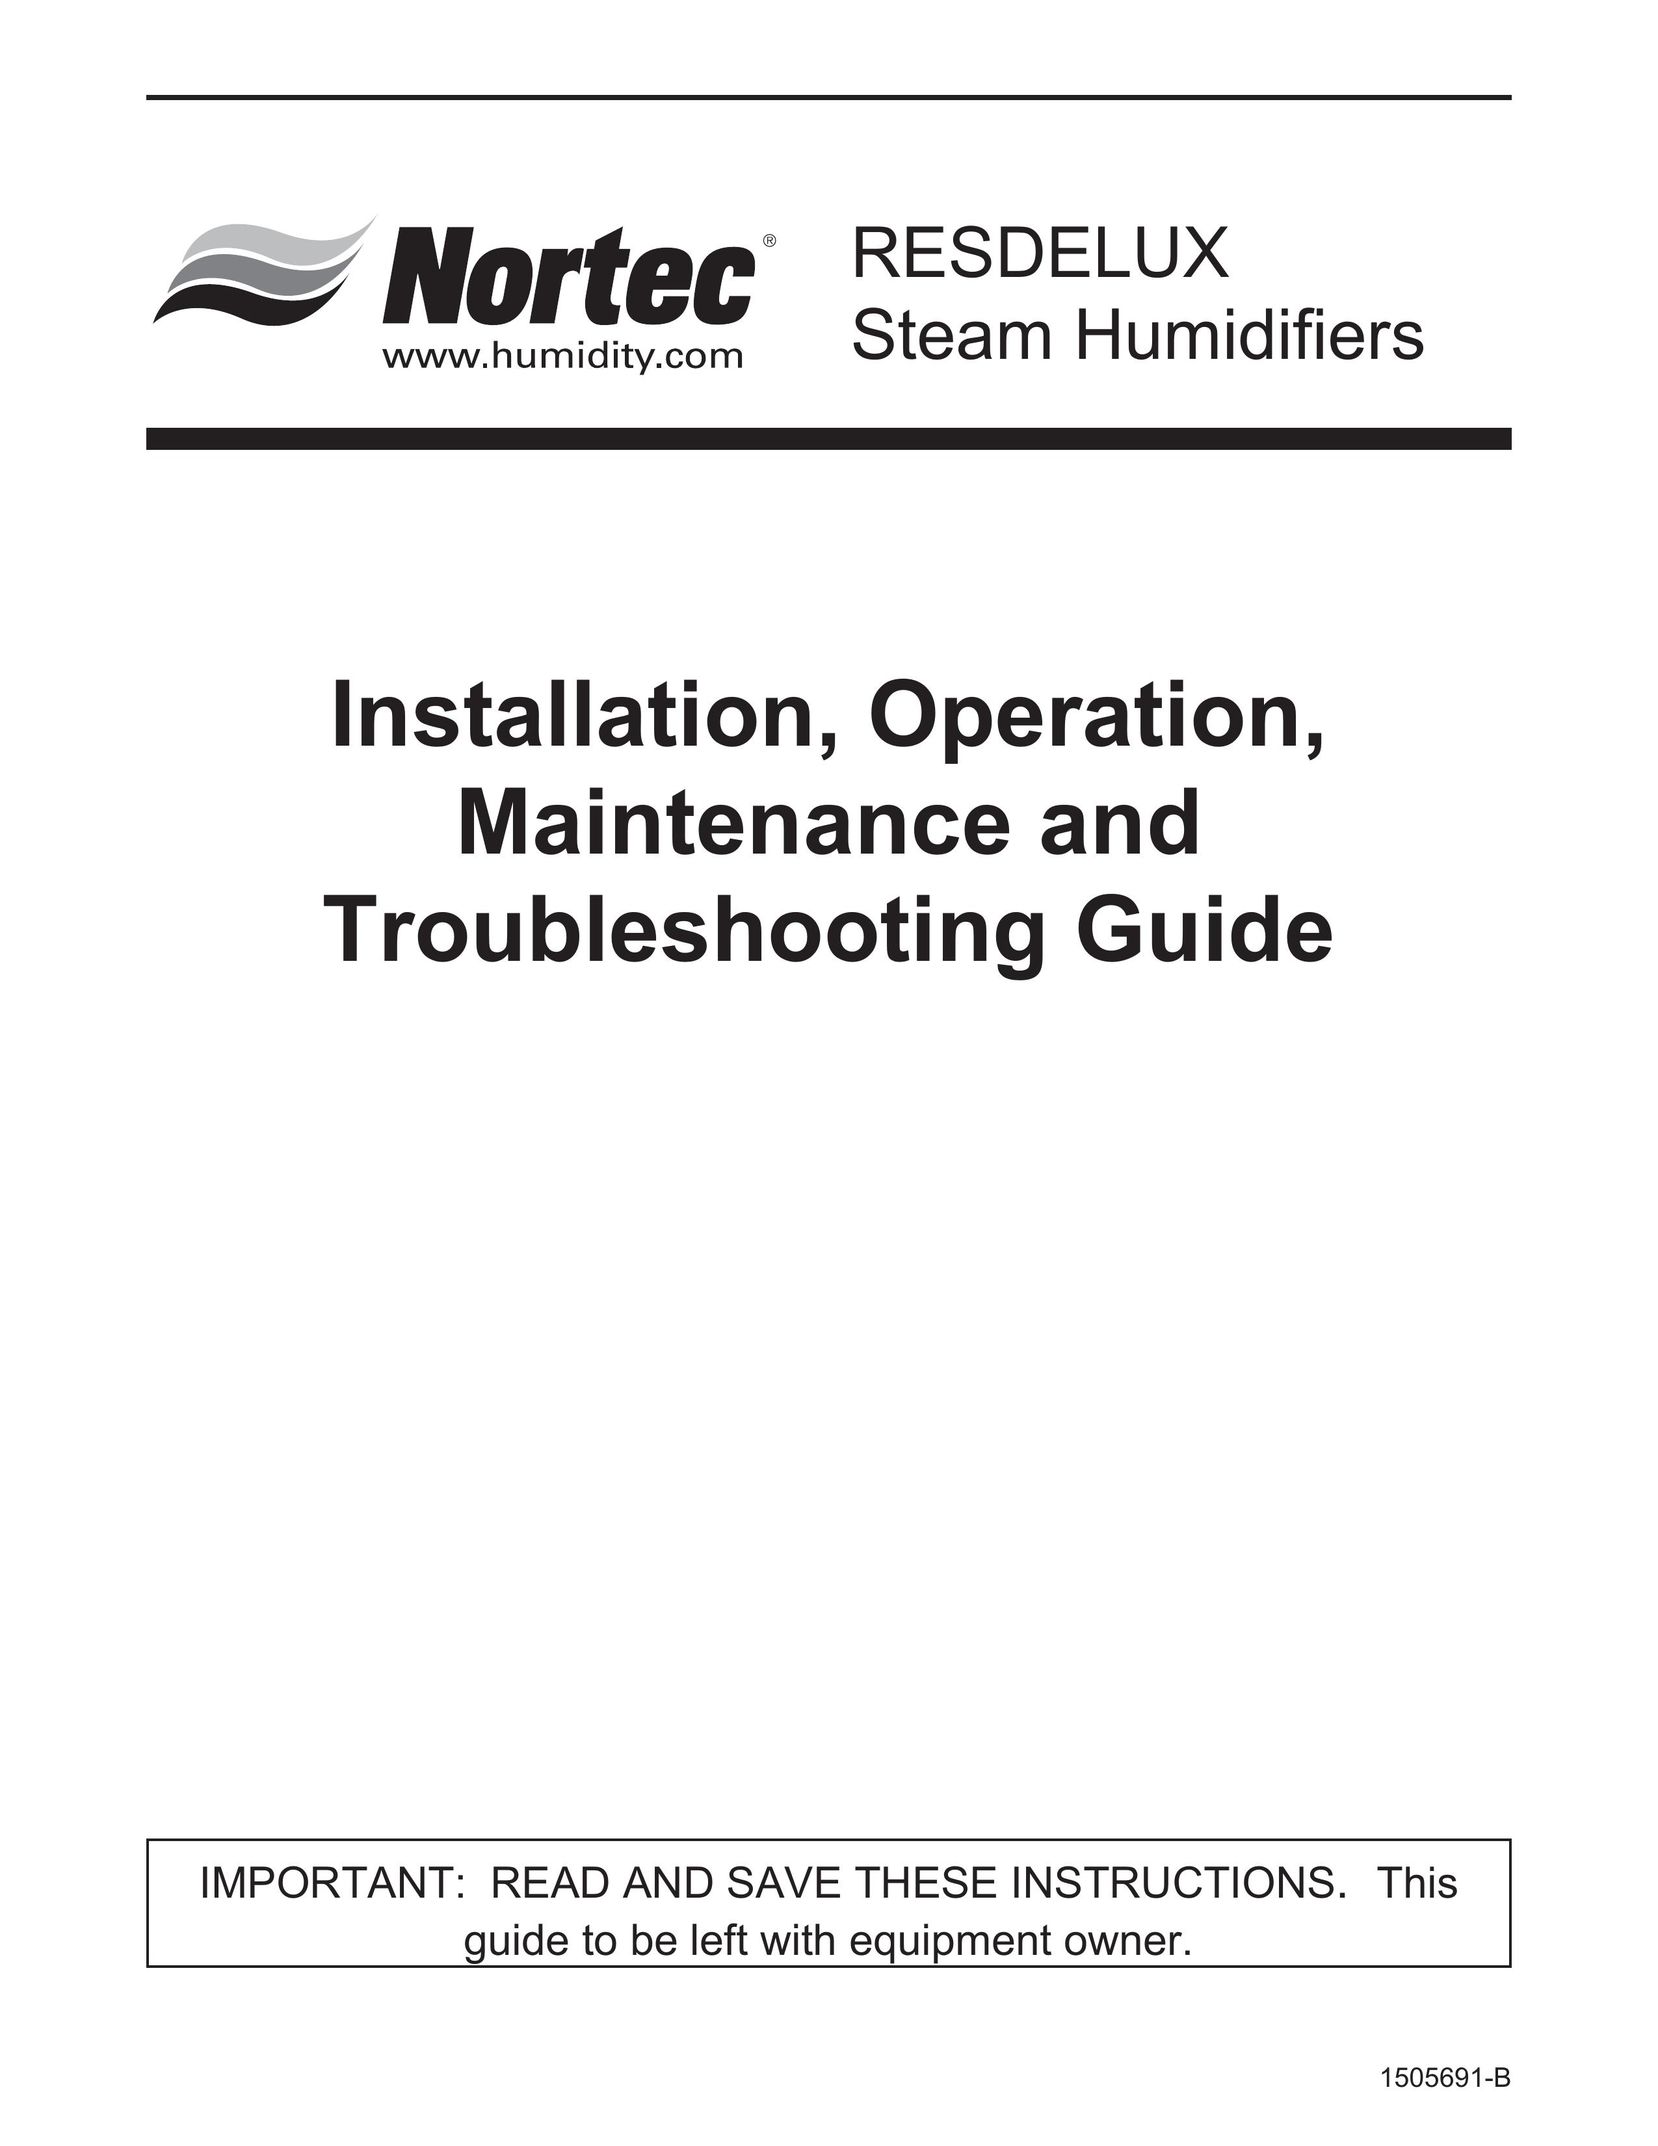 Nortec RESDELUX Humidifier User Manual